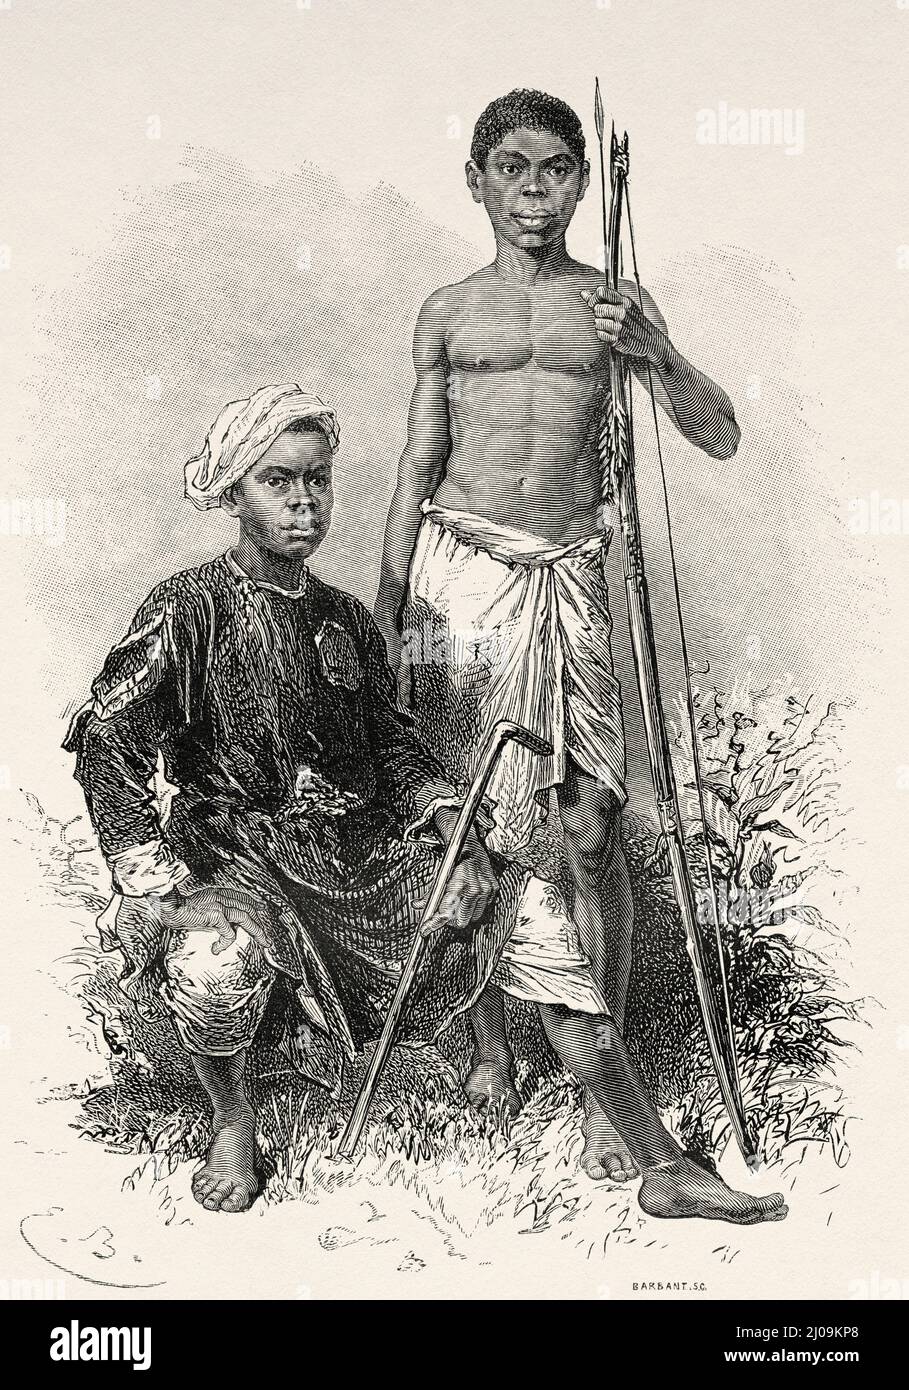 Djacko and Djoumah characters from a central African tribe, Central ...